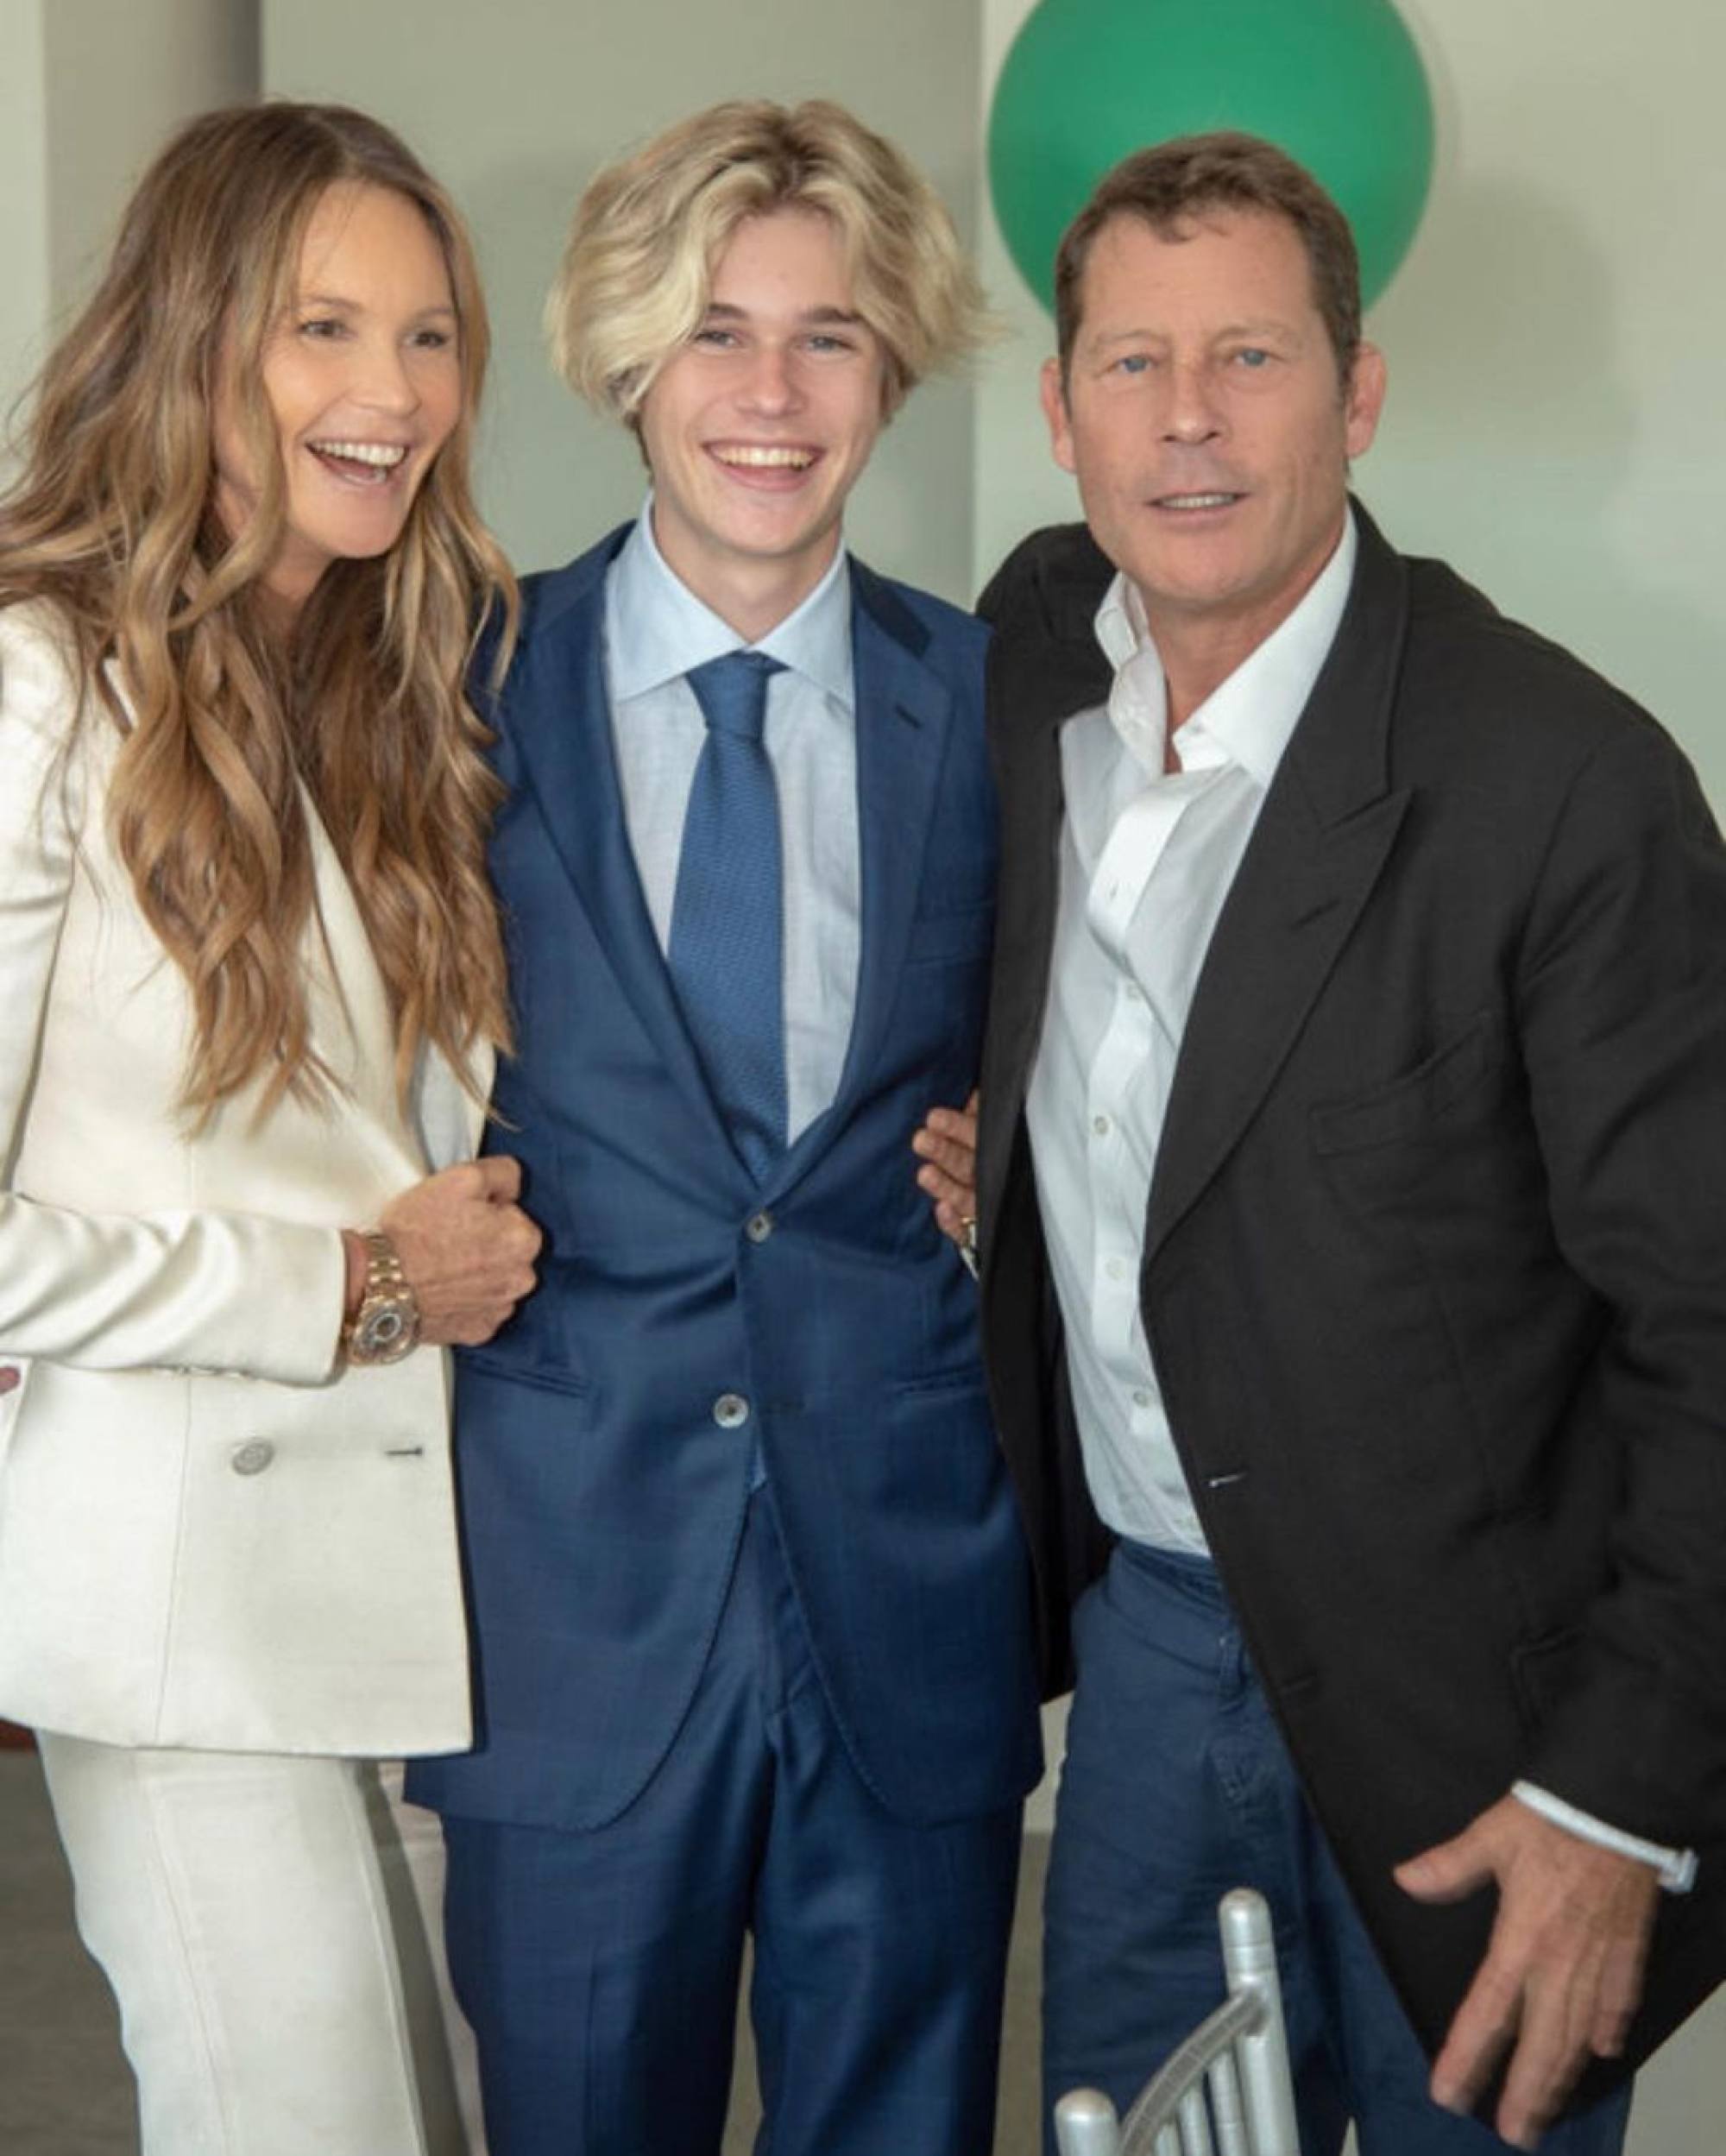 Meet Cy Busson, heartthrob son of supermodel Elle Macpherson and